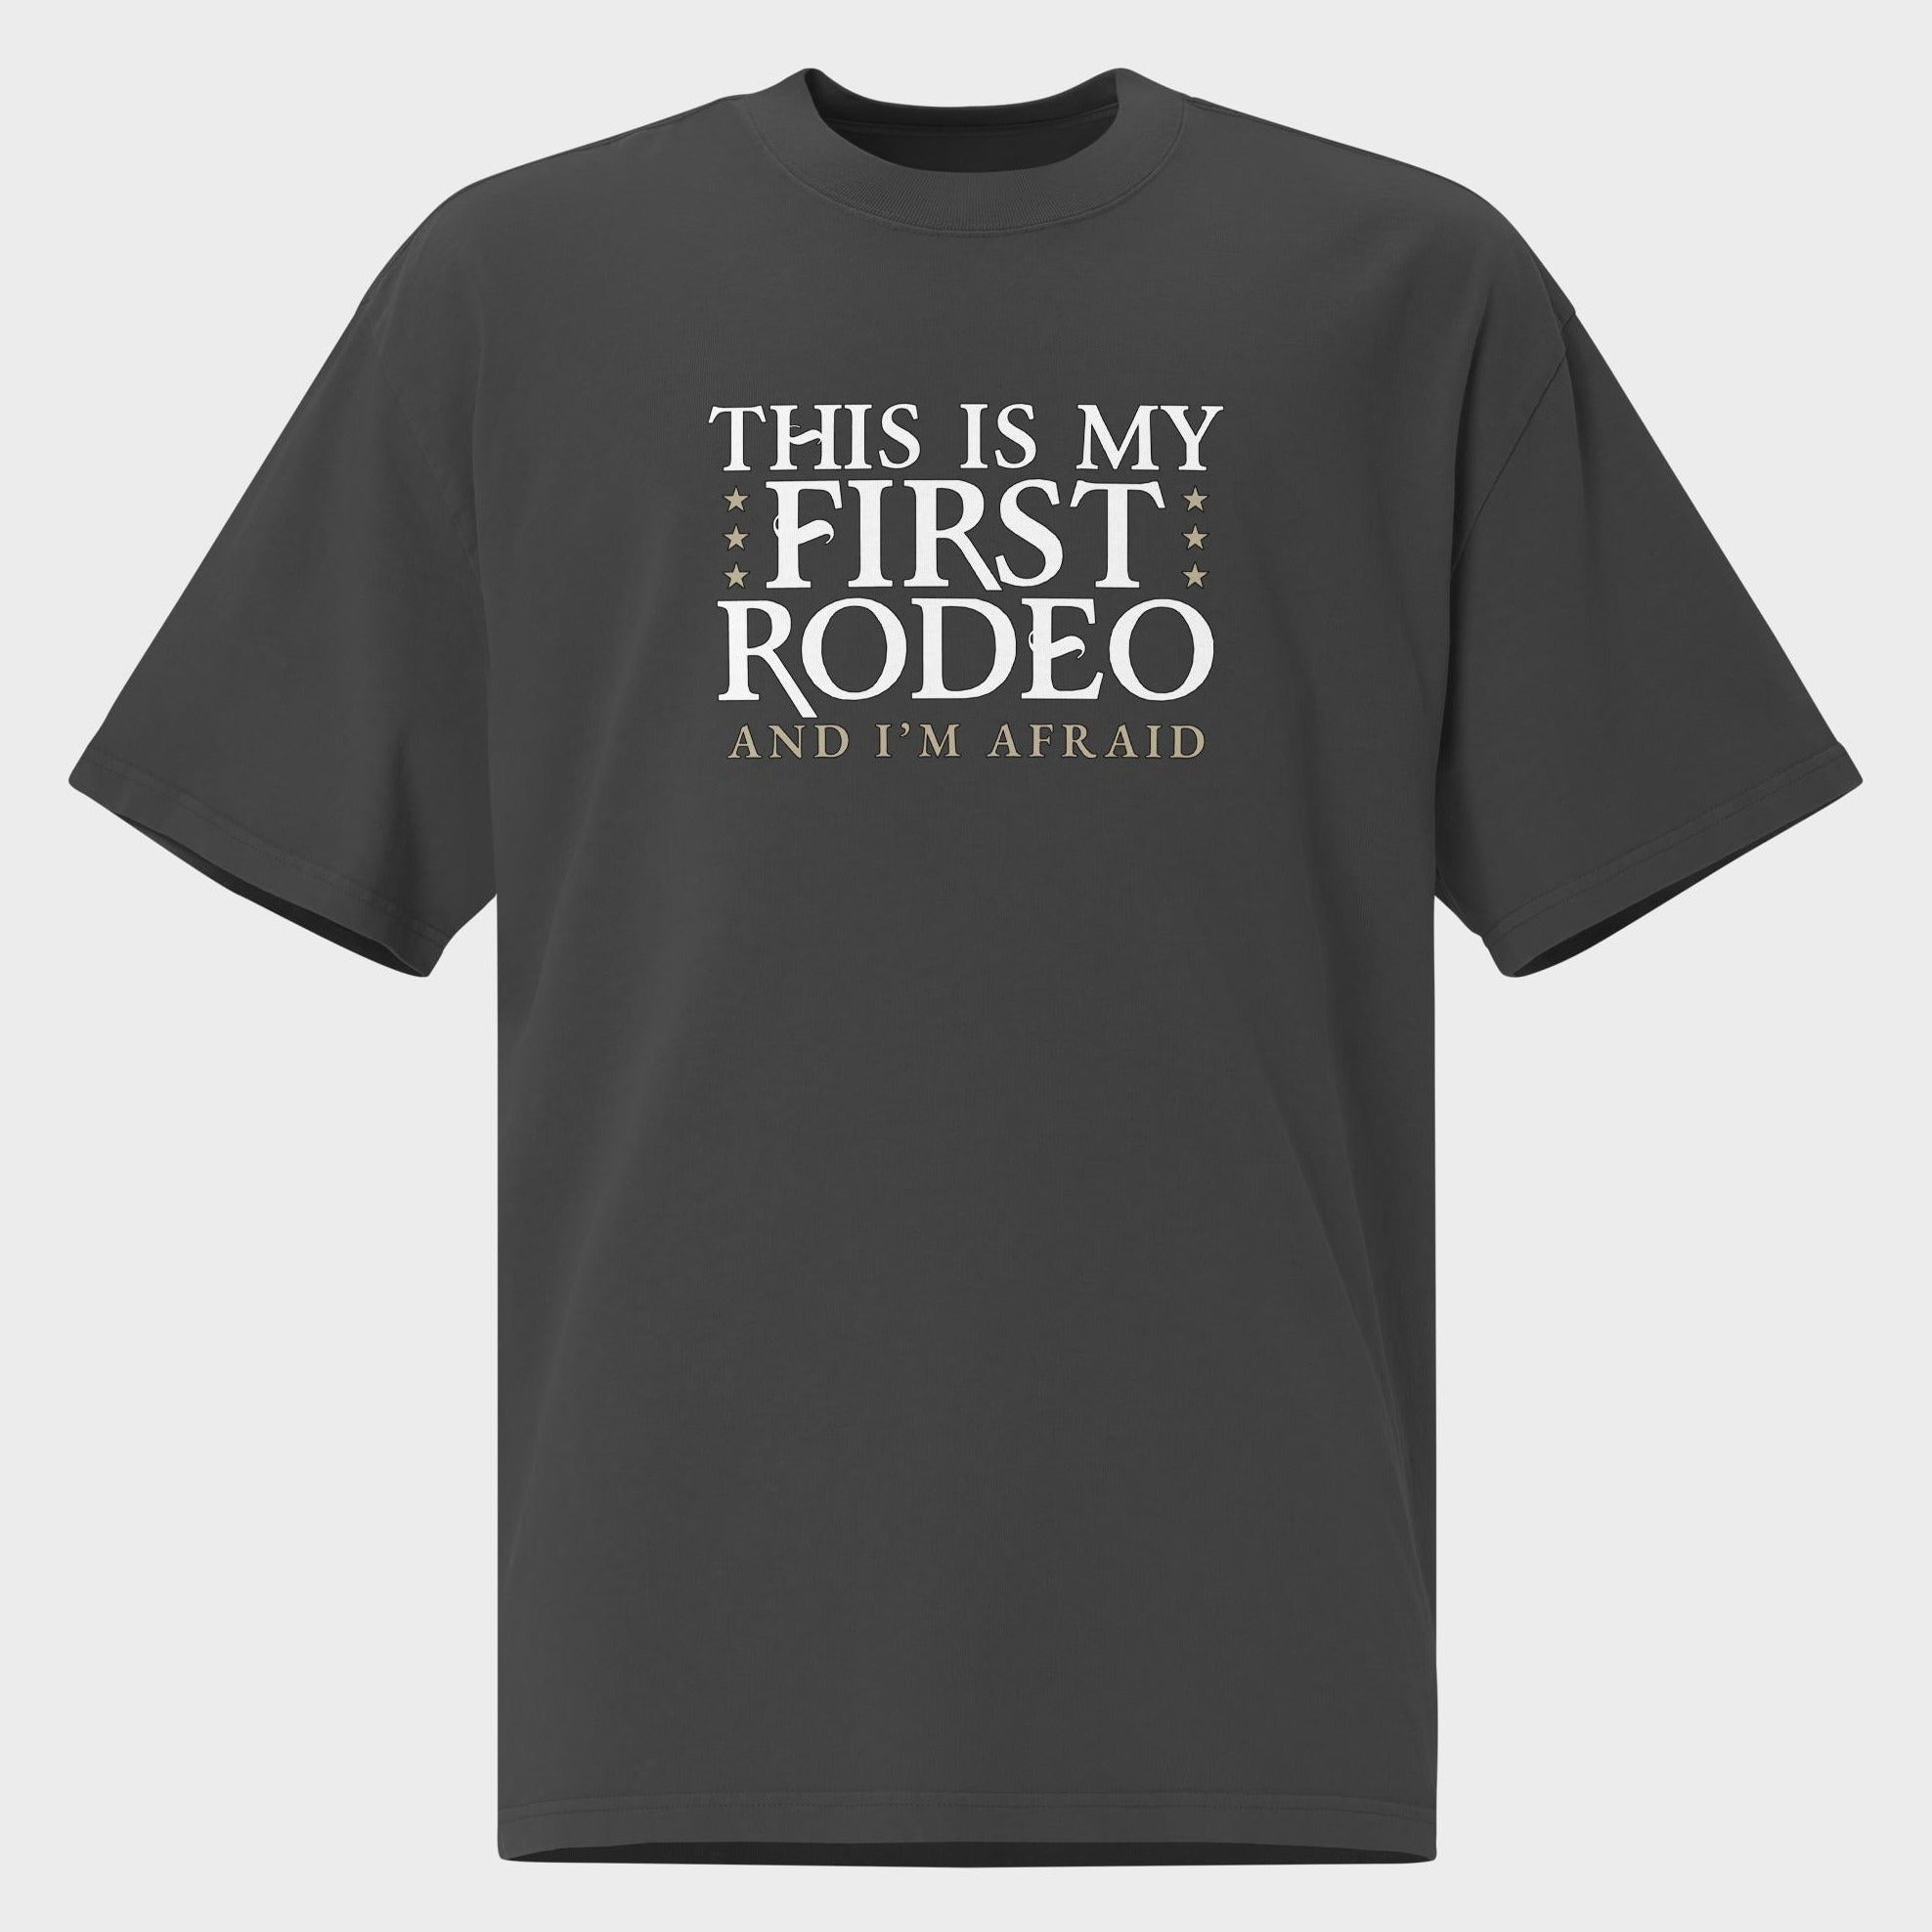 This Is My First Rodeo... - Oversized T-Shirt